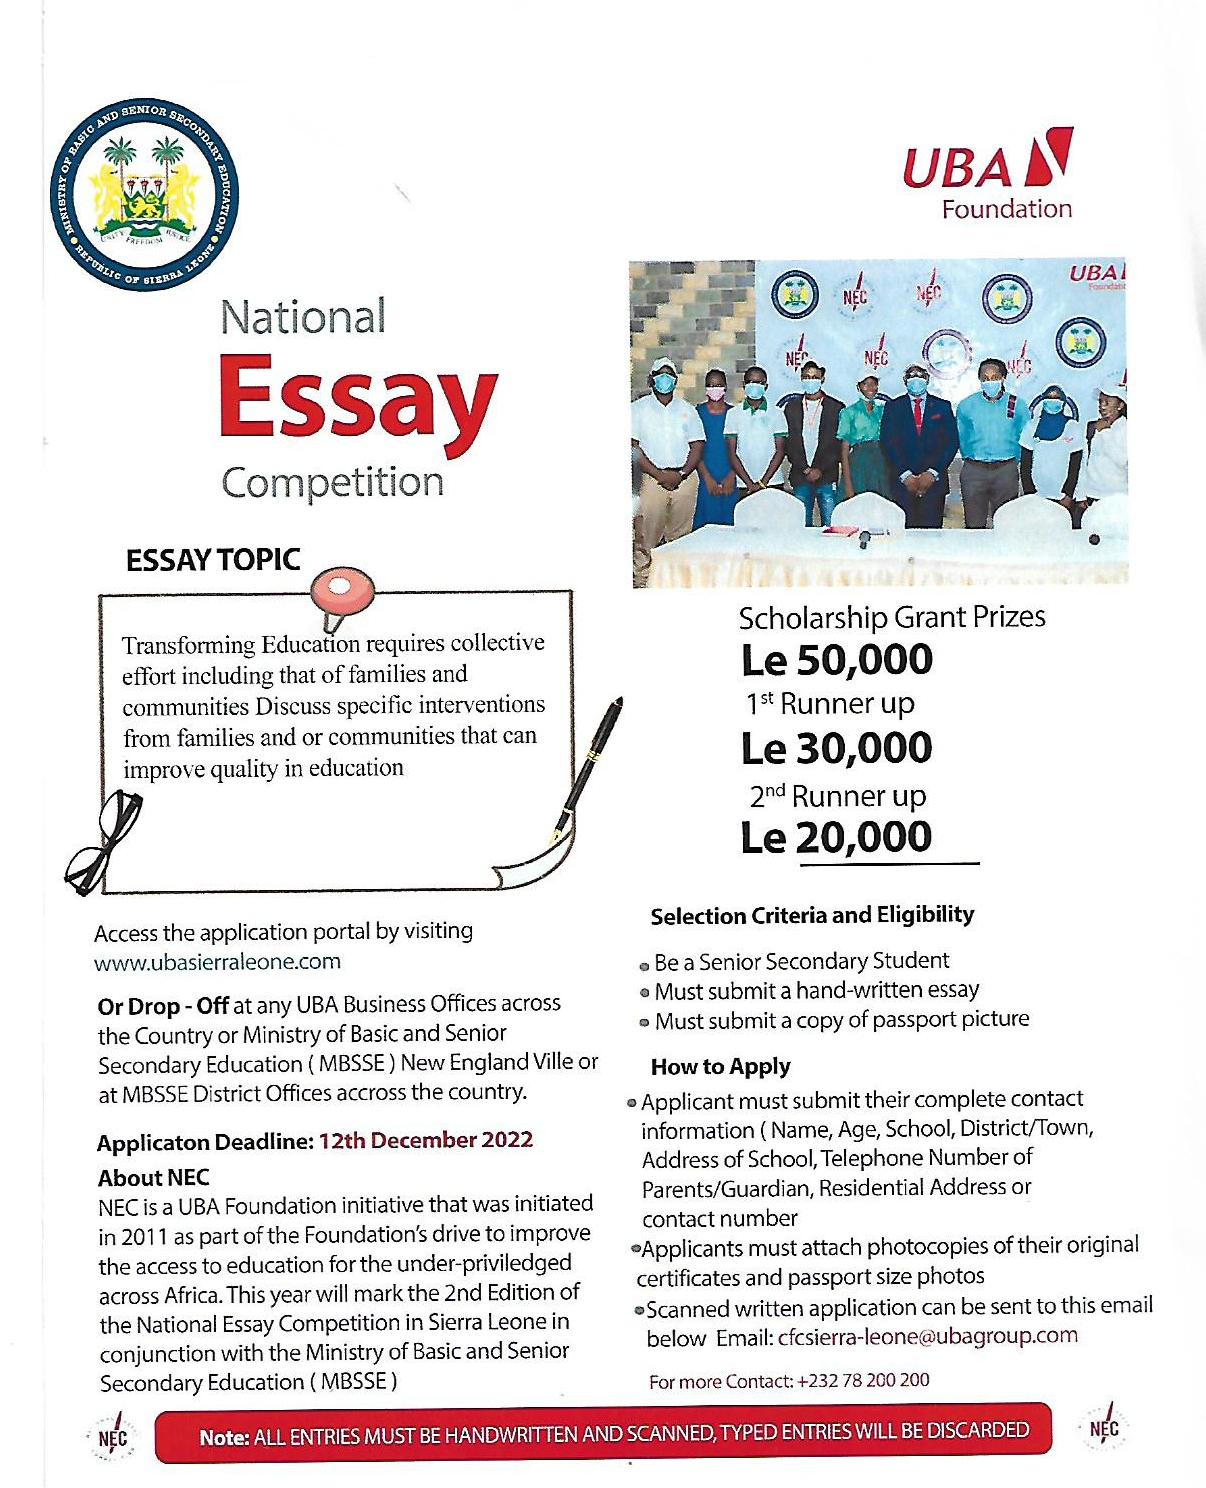 UBA Foundation Launches 3rd Edition of Essay Competition